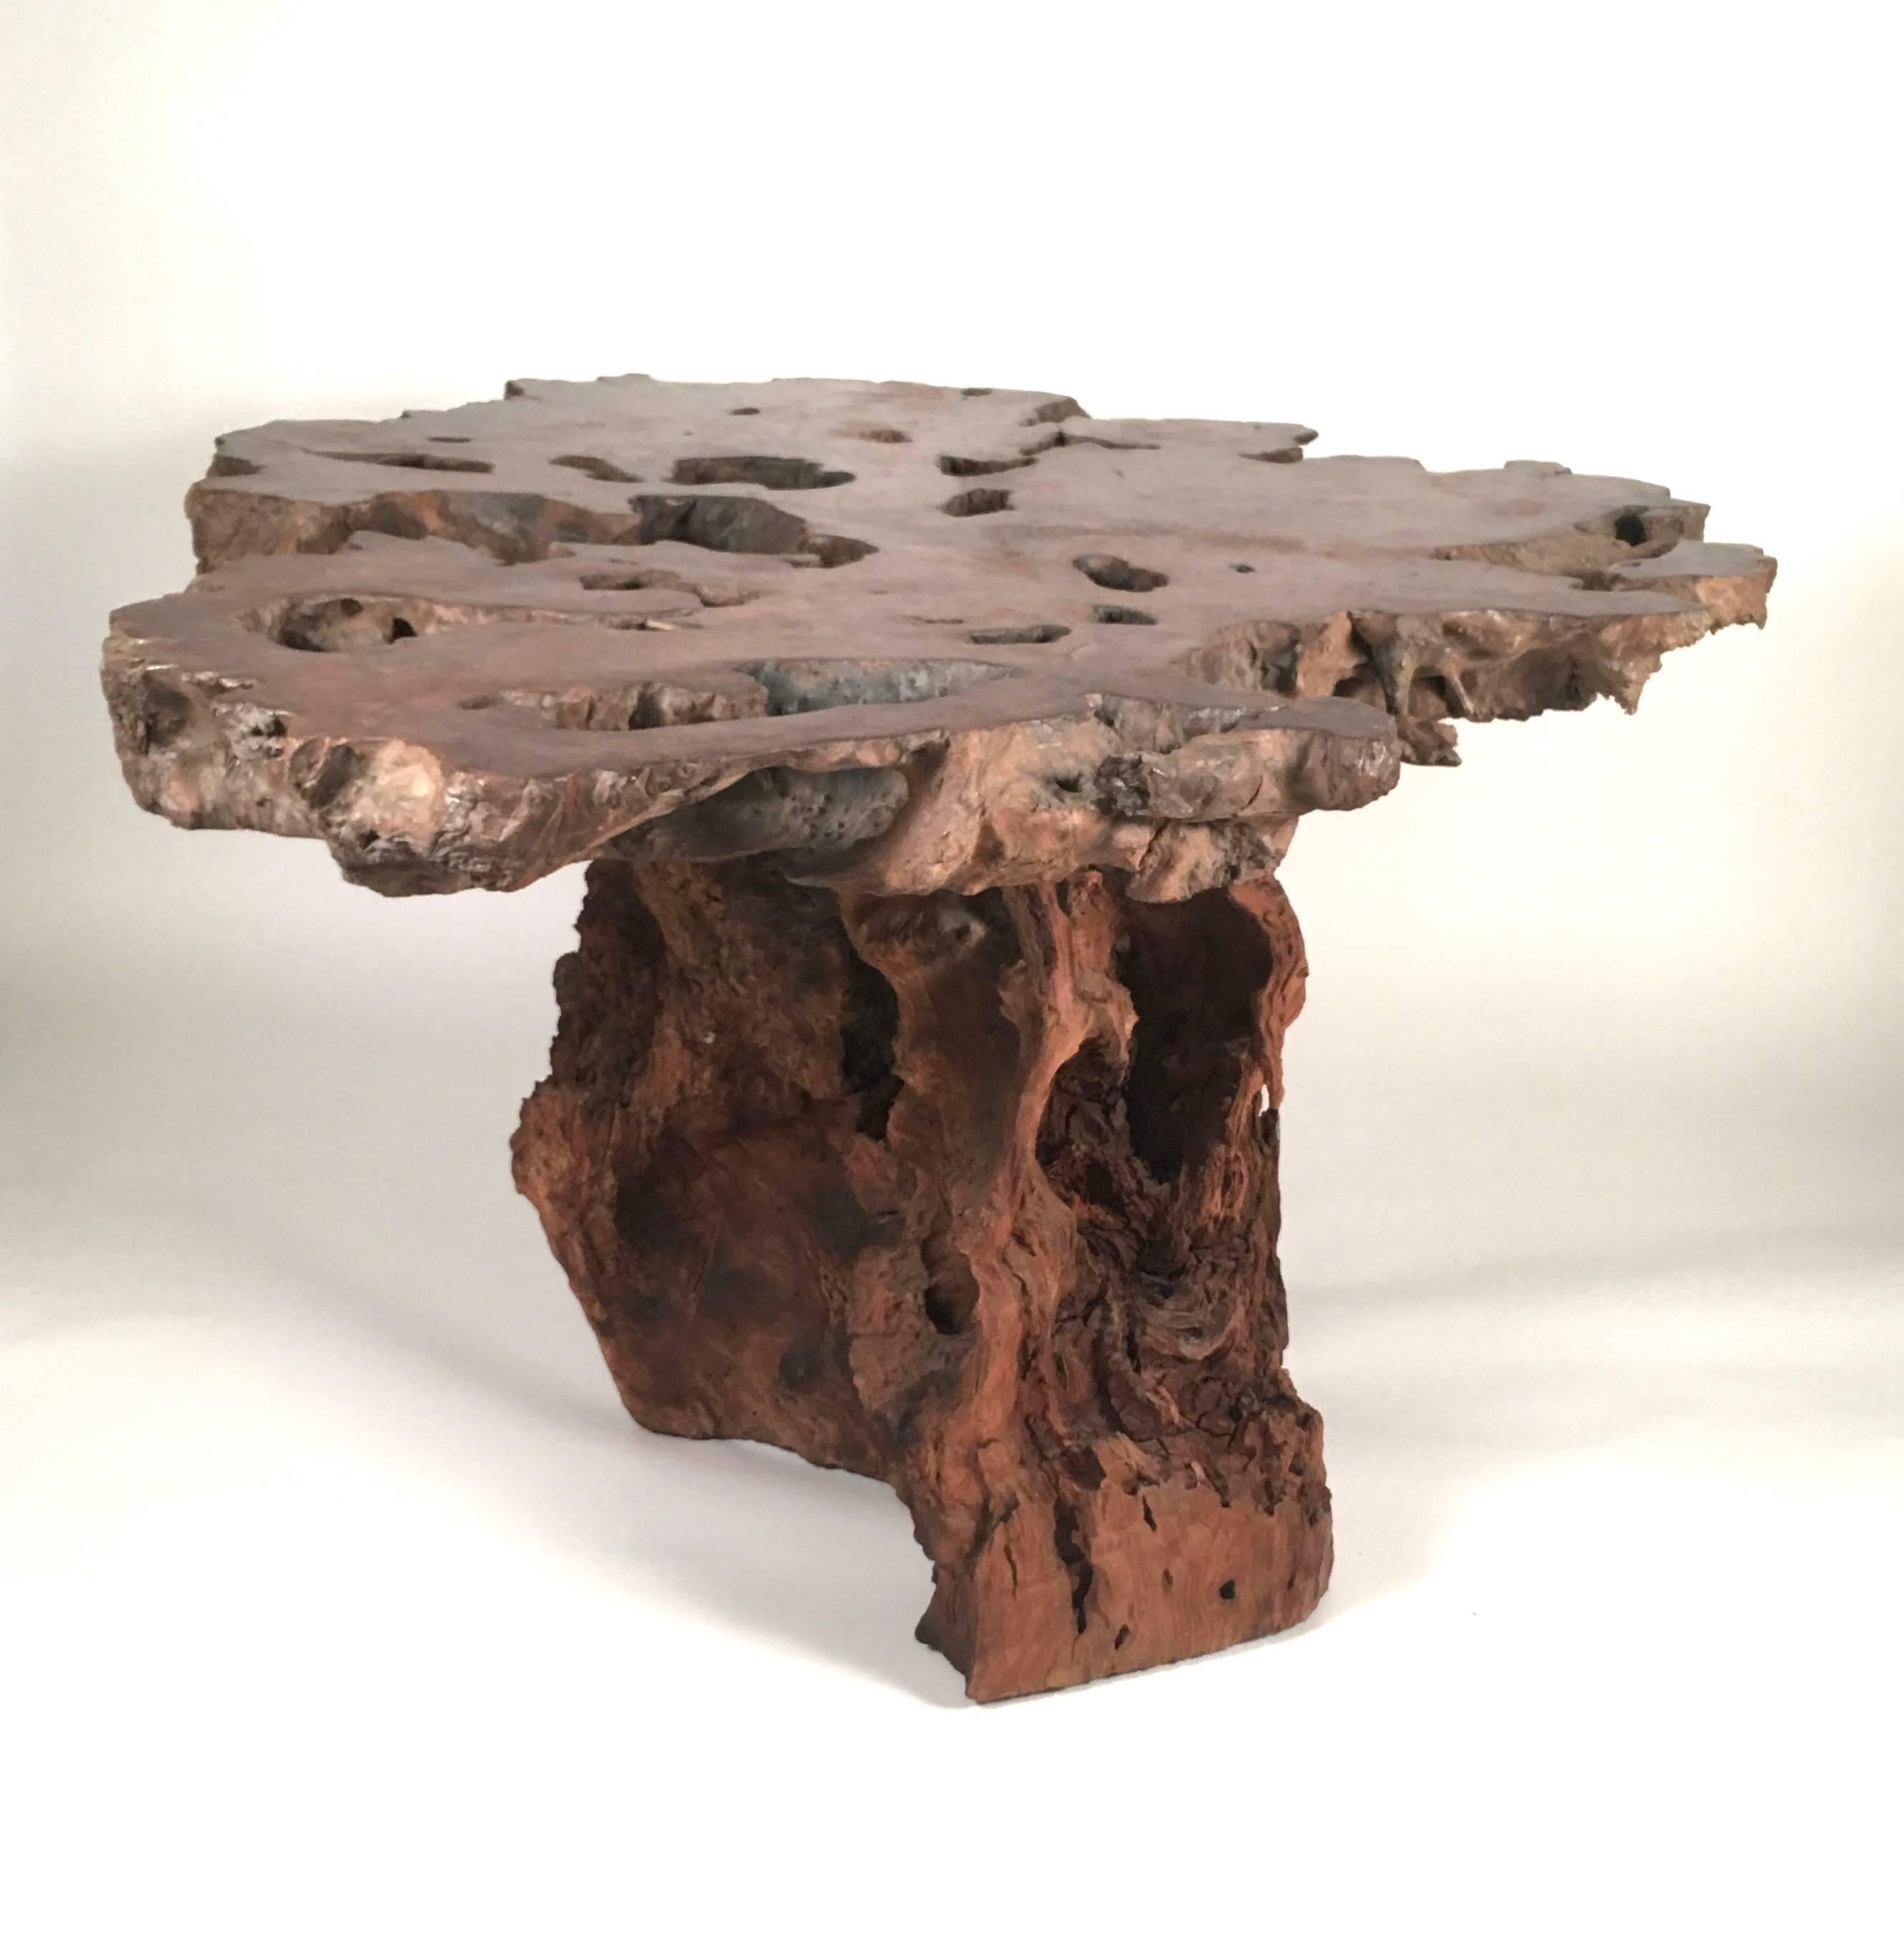 A spectacular, monumental  California Redwood live edge table. With its richly figured top, retaining its understated dry finish and conforming sculptural trunk base, this table makes an impressive statement floating as a centre table in an entrance